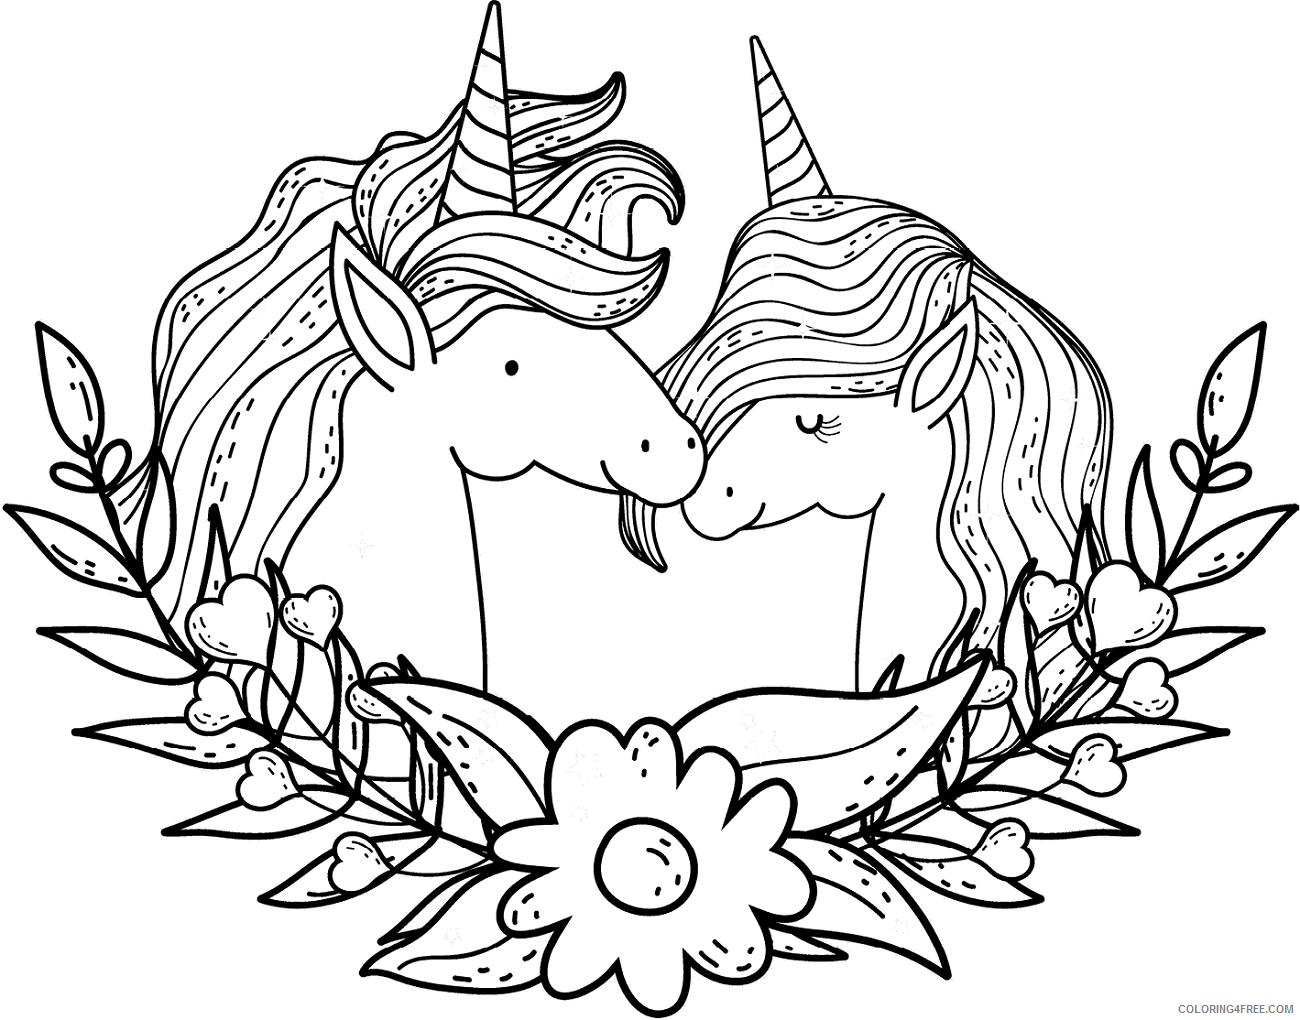 Unicorn Coloring Pages a_couple_unicorn Printable 2021 6016 Coloring4free